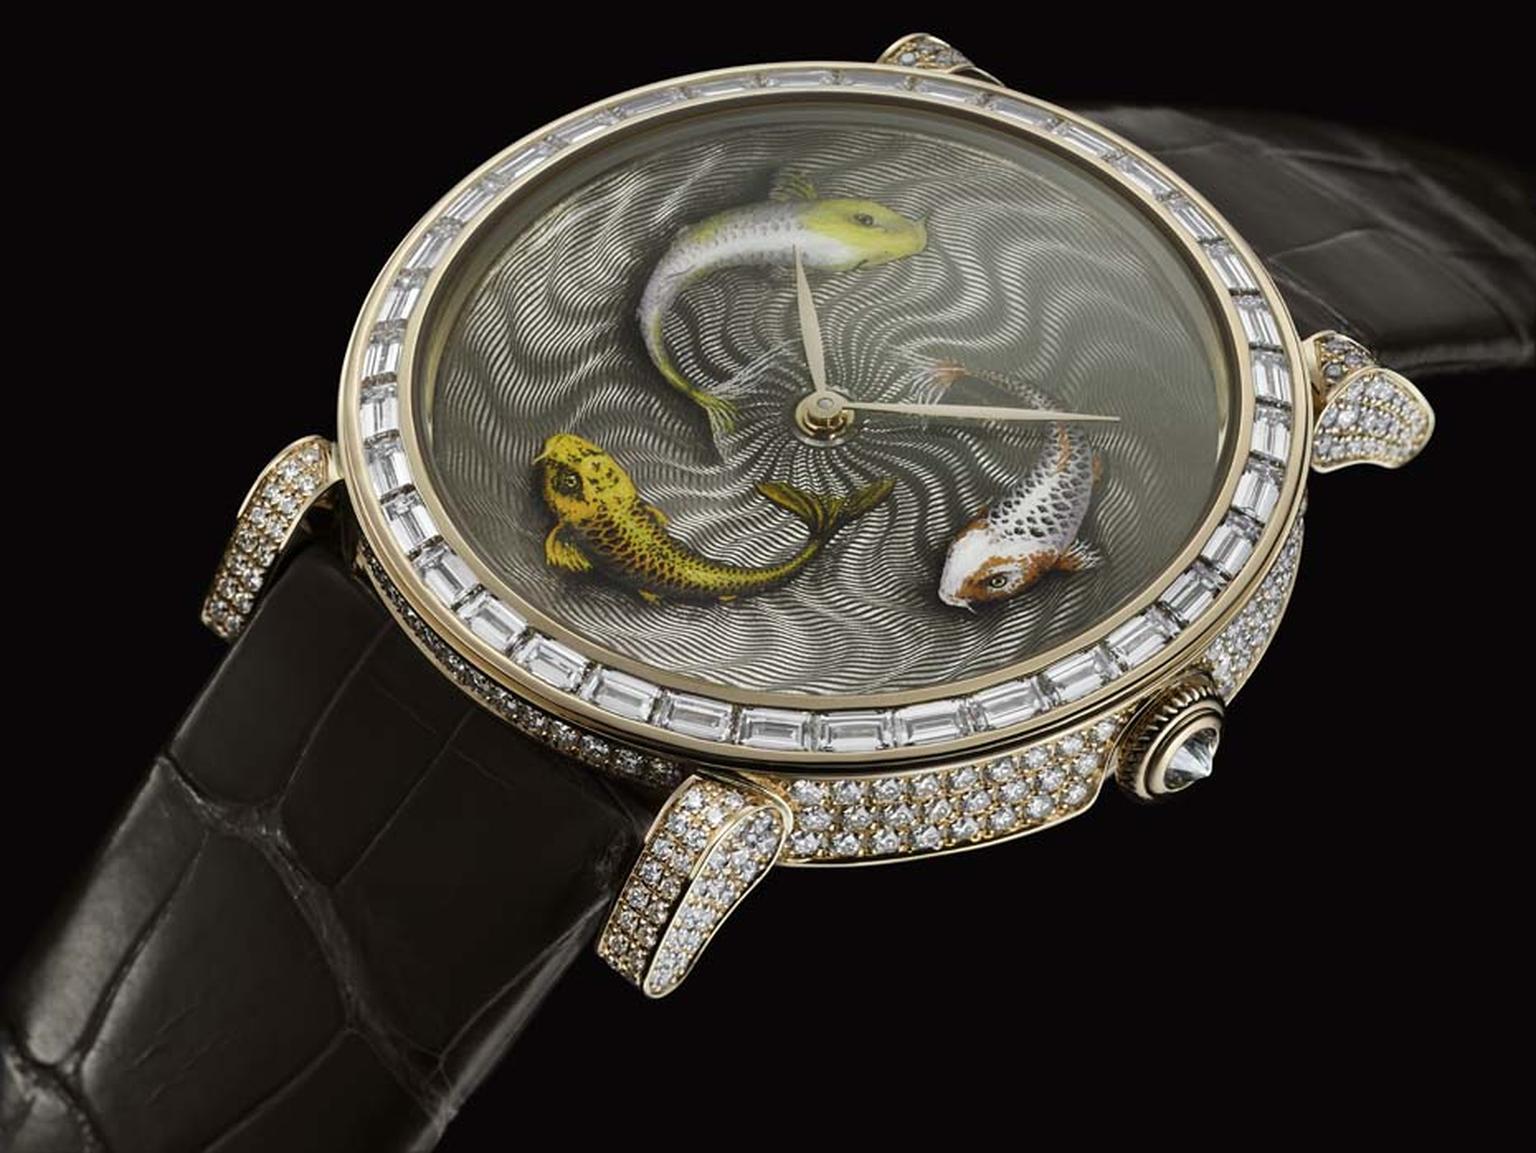 The DeLaneau Koi watch displays the incredible level of Grand Feu enamel painting executed at the brand's headquarters in Geneva. A unique piece, the three Koi fish swim against a swirling guilloché background and are trapped for eternity in a 42mm red go